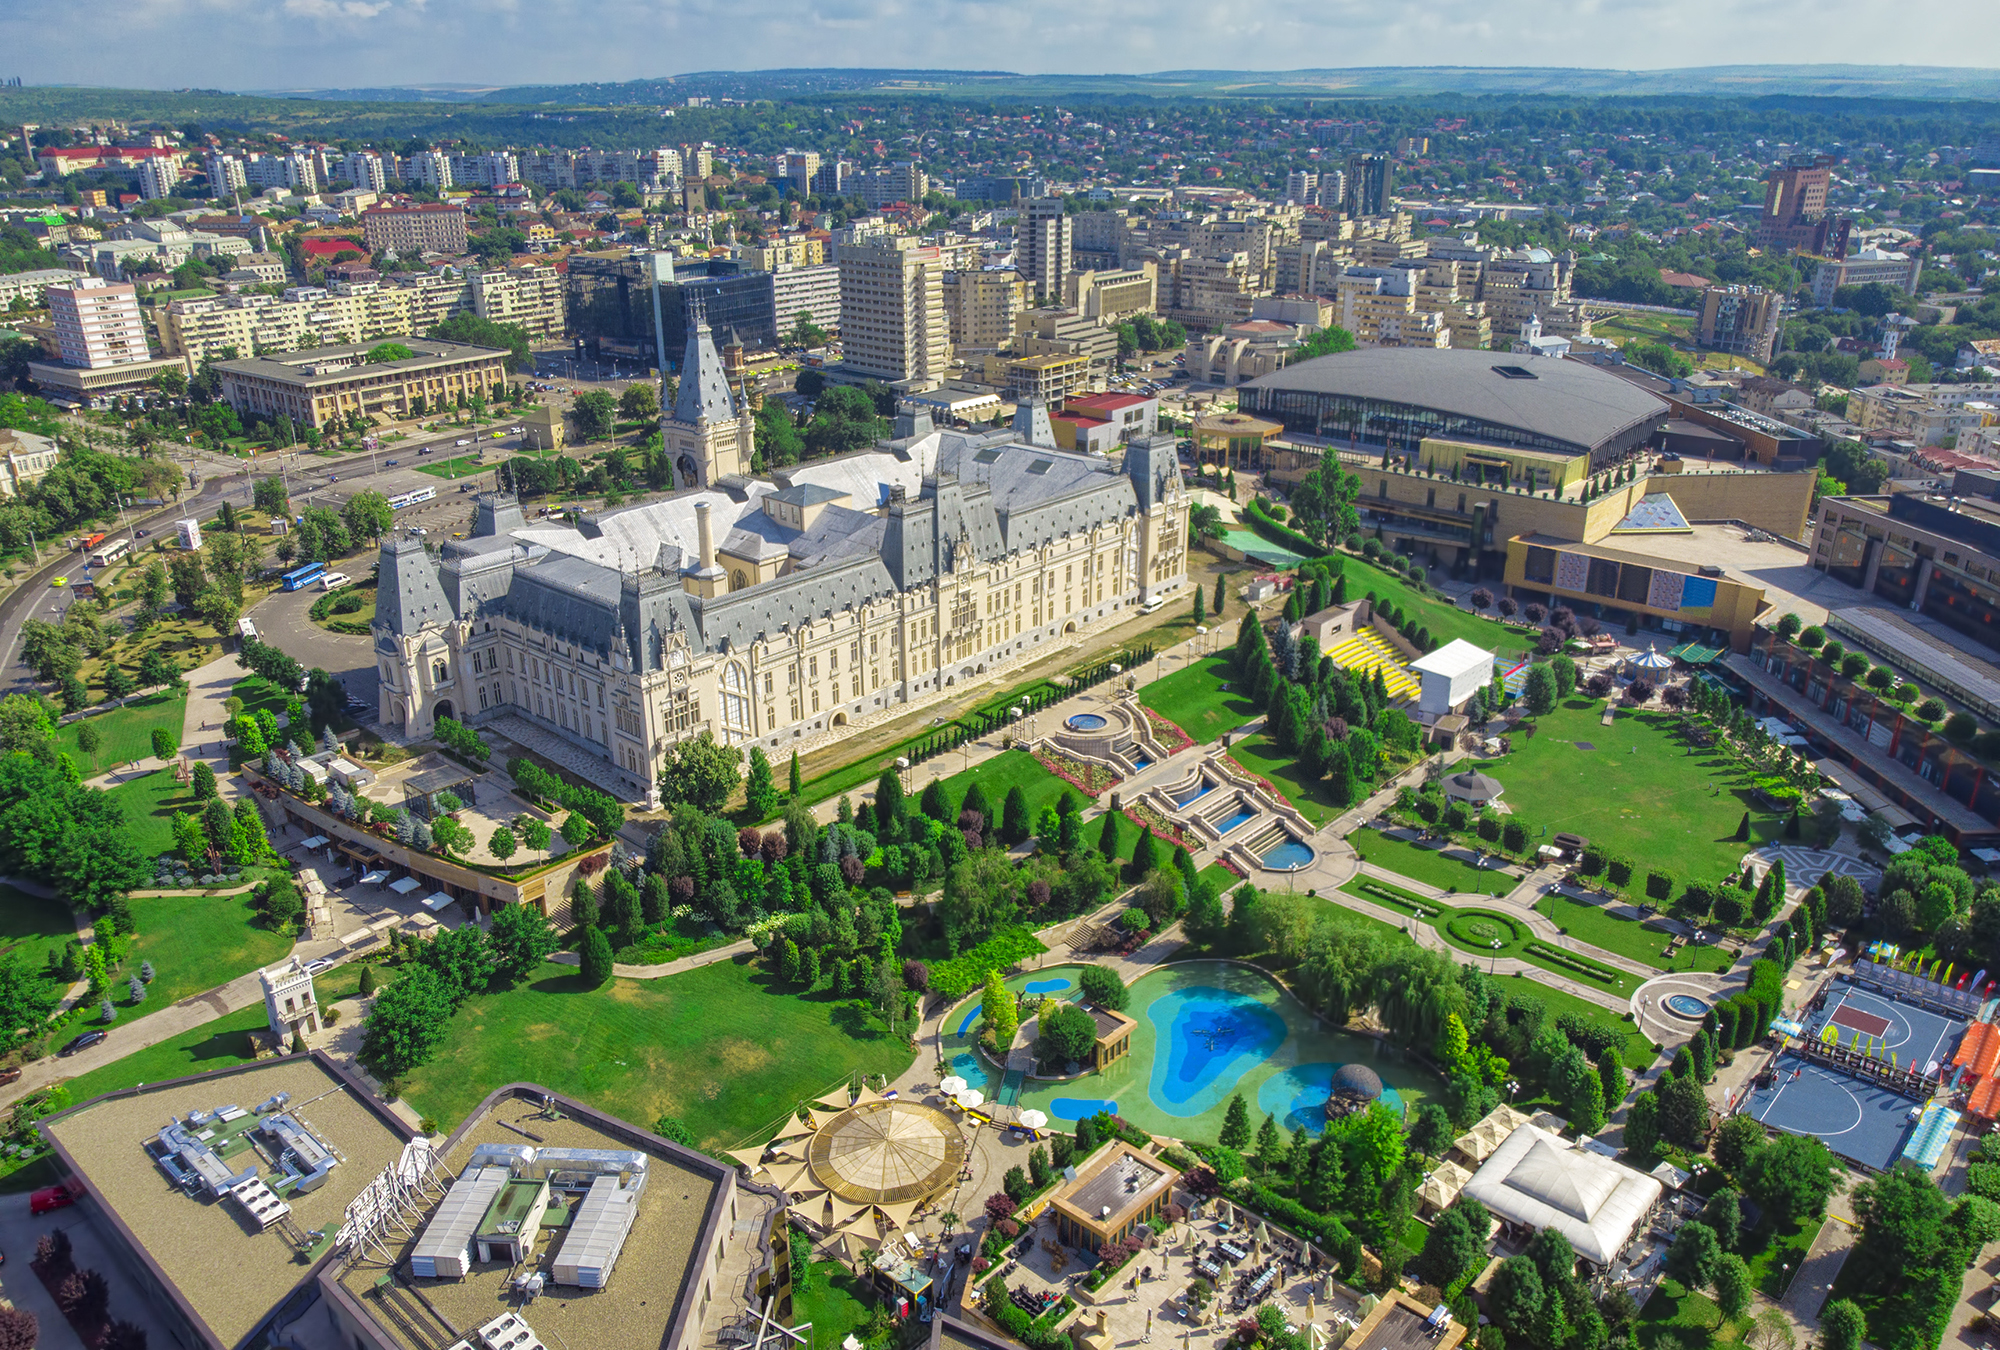 Our site in Iasi is found in Romania and the city has been the center of Moldavian culture since the 15th century.